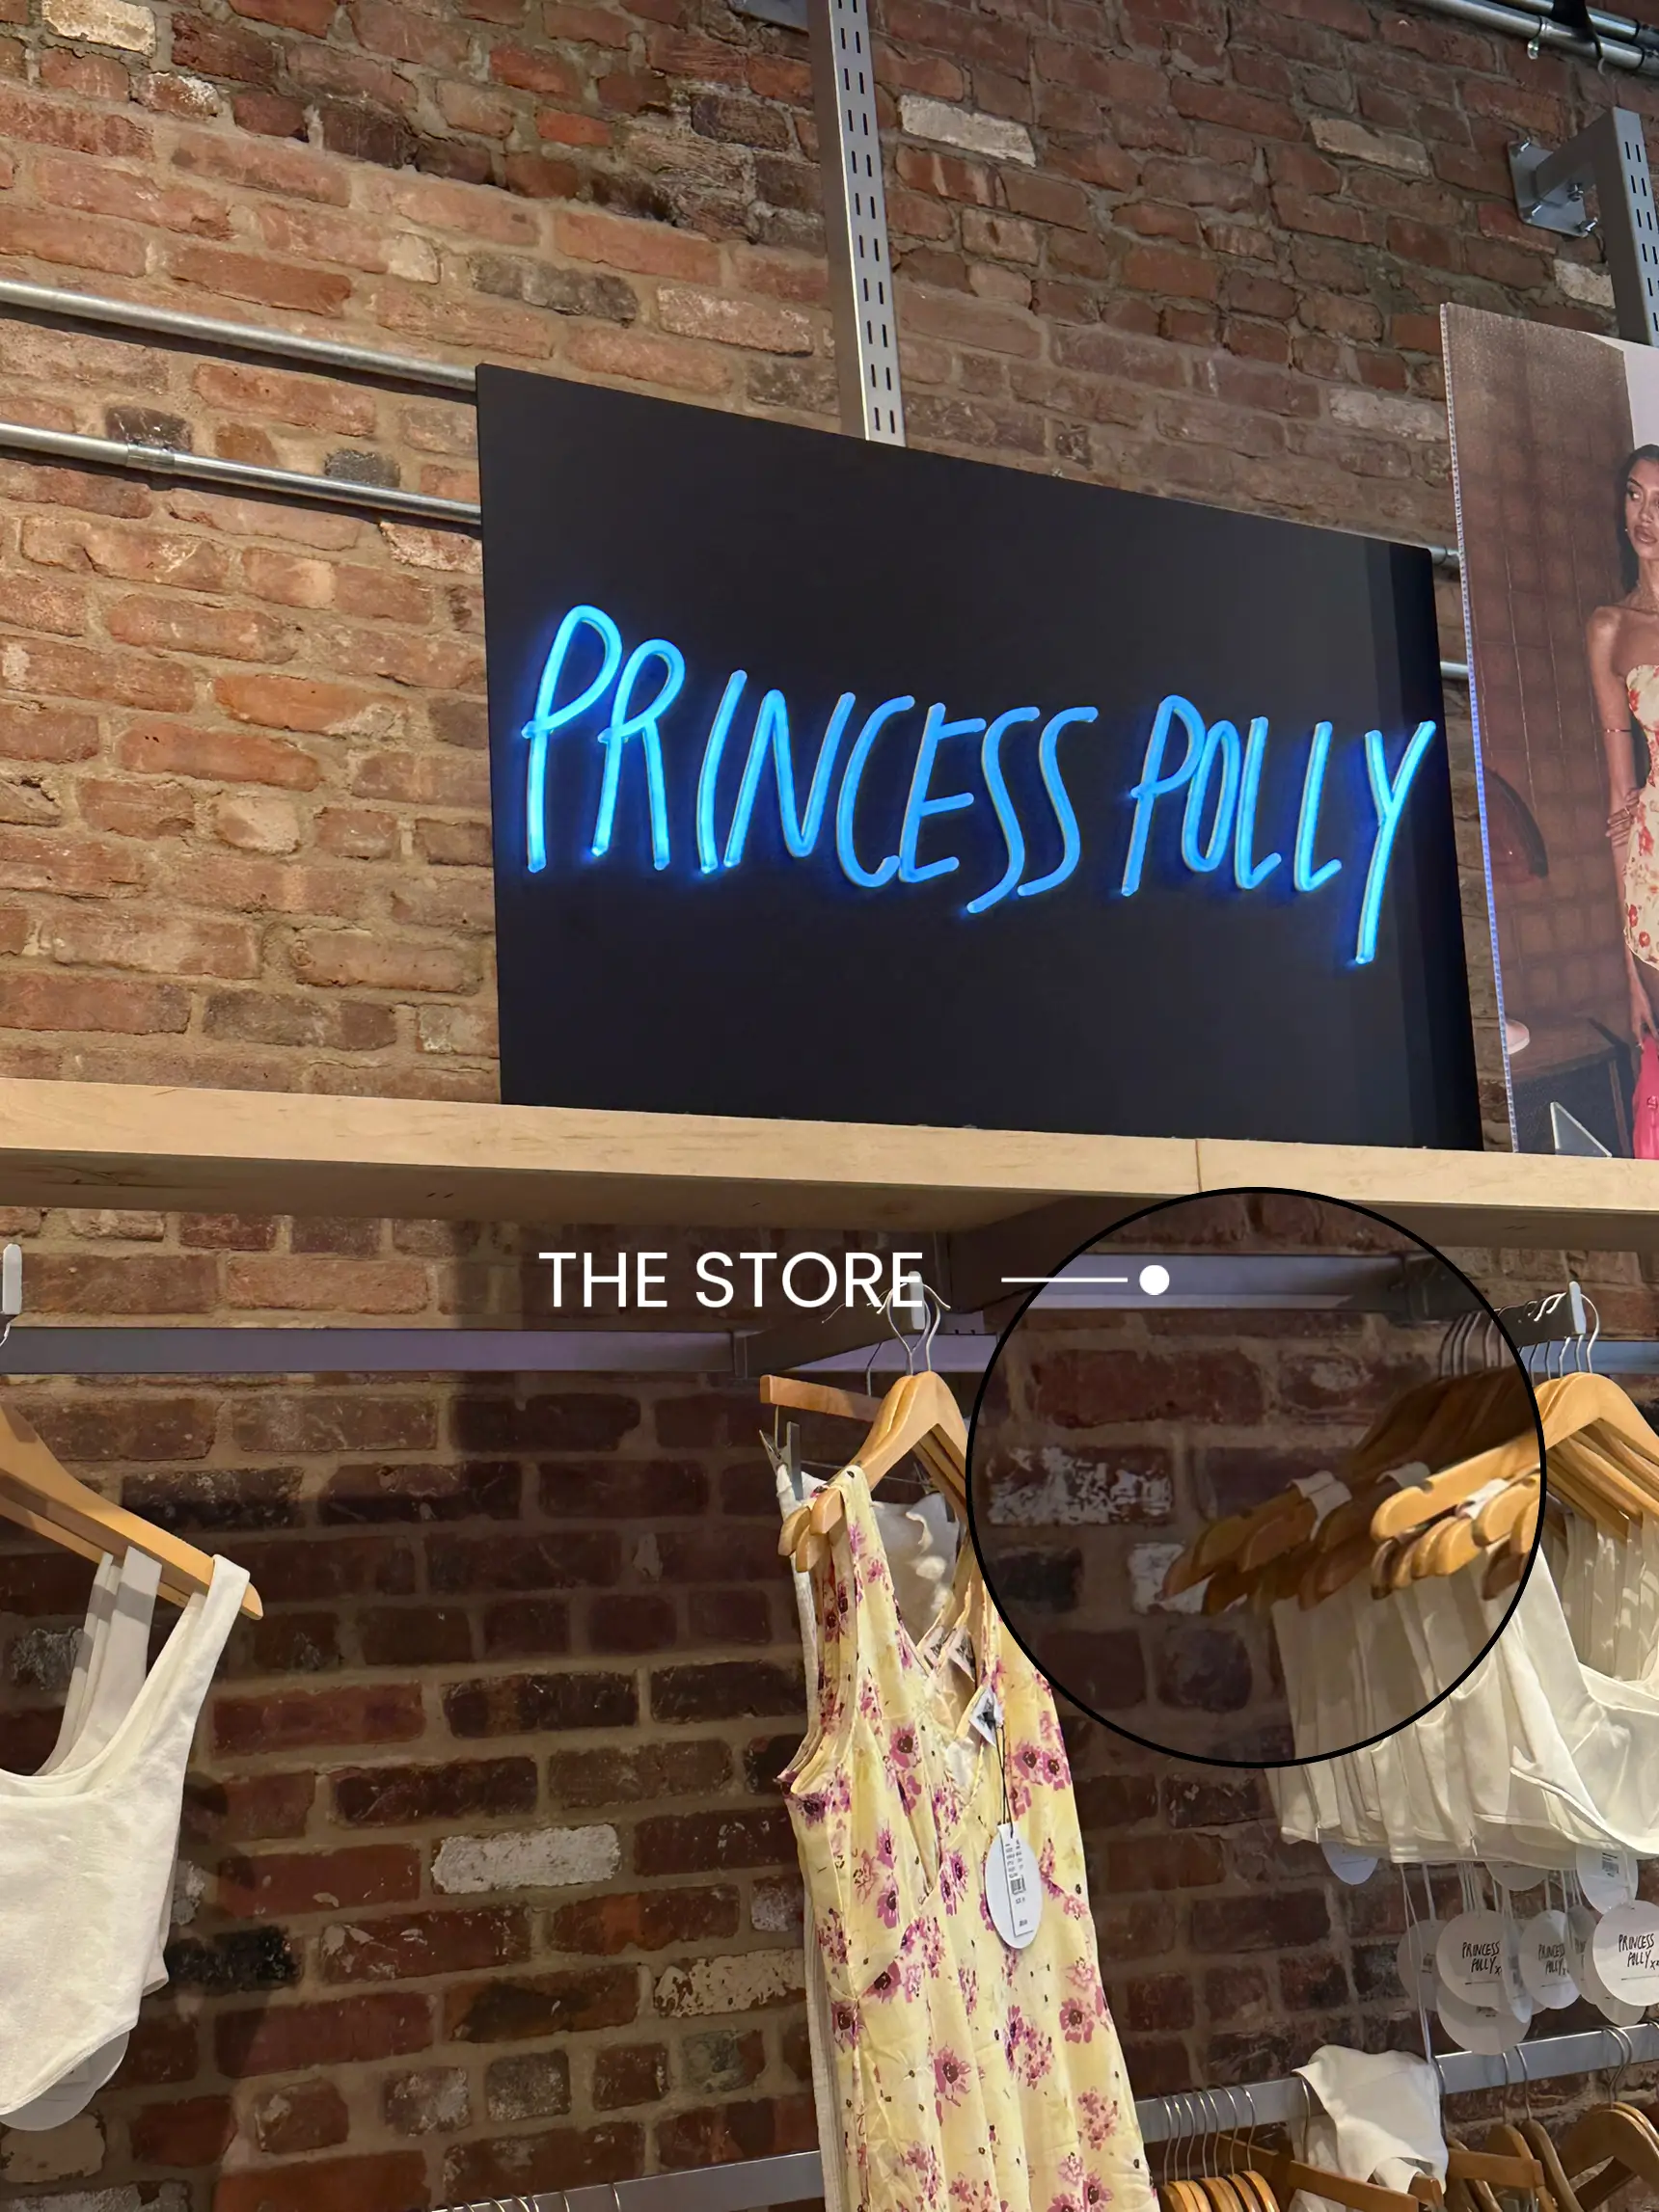 SHOPPING PRINCESS POLLY IN PERSON: SOHO NYC, Gallery posted by Hannah  Boykin